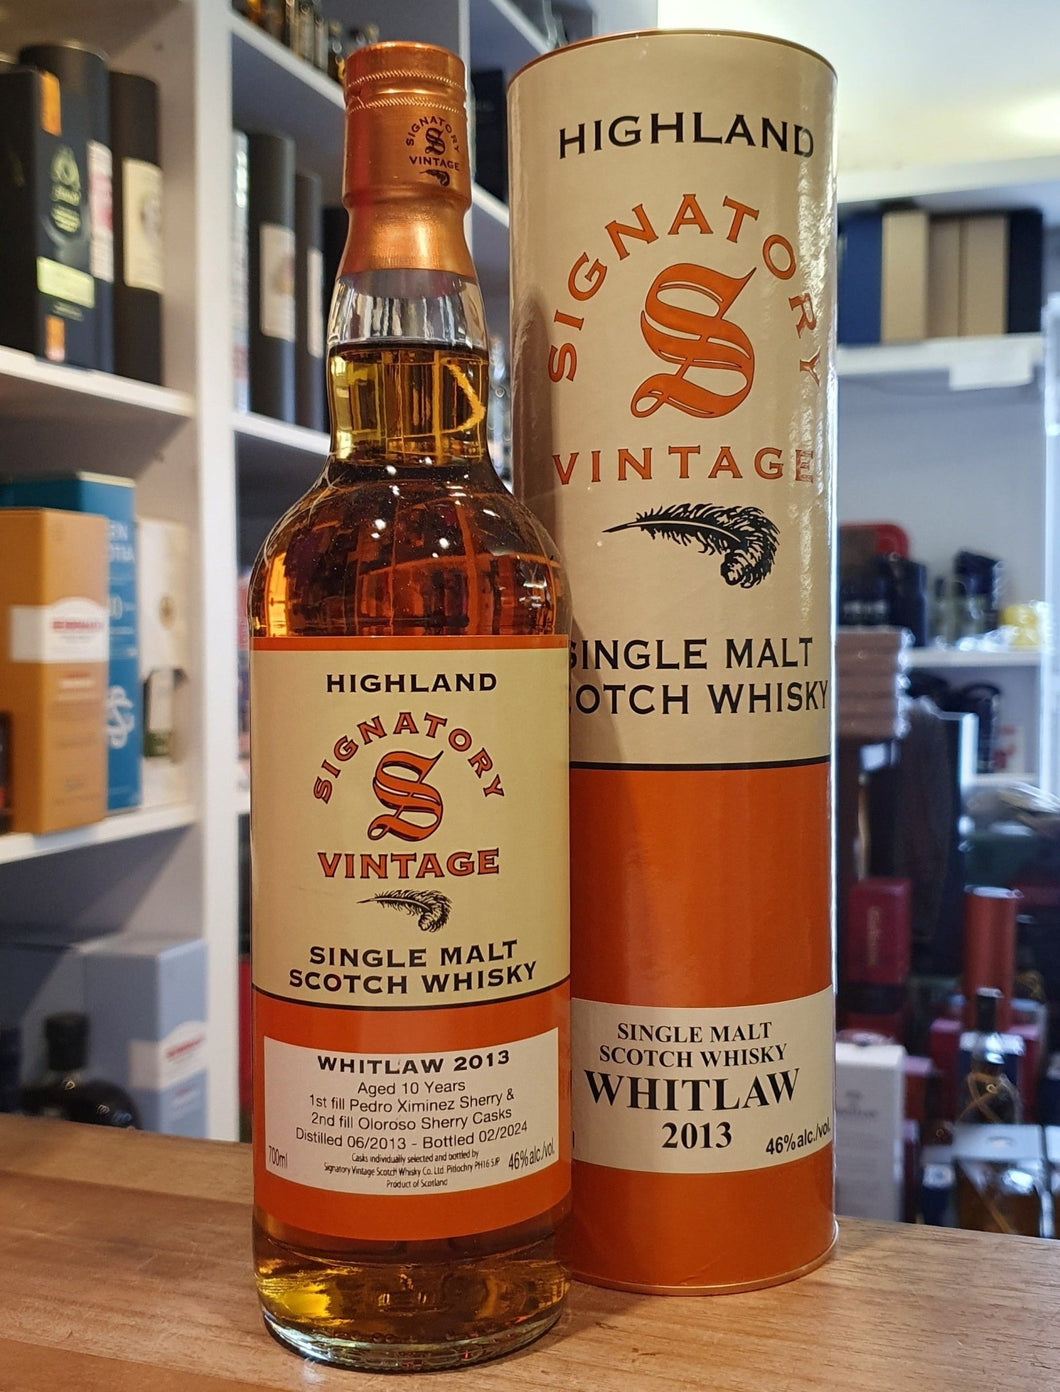 Whitlaw 2013 2024 PX & Oloroso cask Signatory Copper Vintage 0,7l 46% vol. Whisky  Islands Highland Park  1st Fill PS Sherry & 2nd Fill Oloroso Sherry Casks 